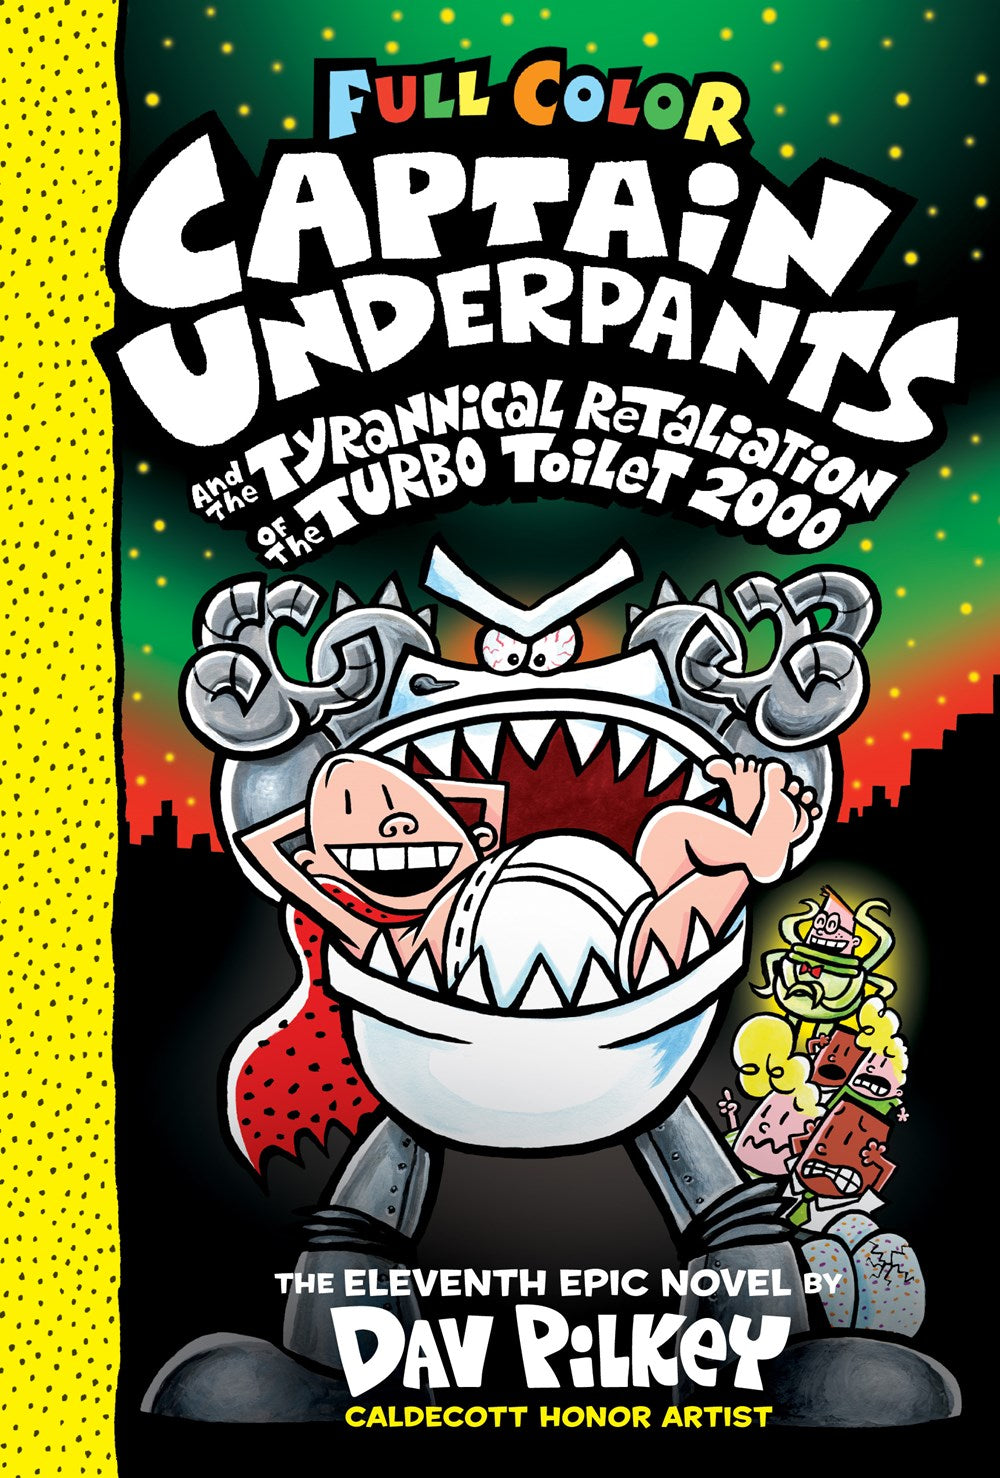 Captain Underpants and the Tyrannical Retaliation of the Turbo Toilet 2000 (Book 11)